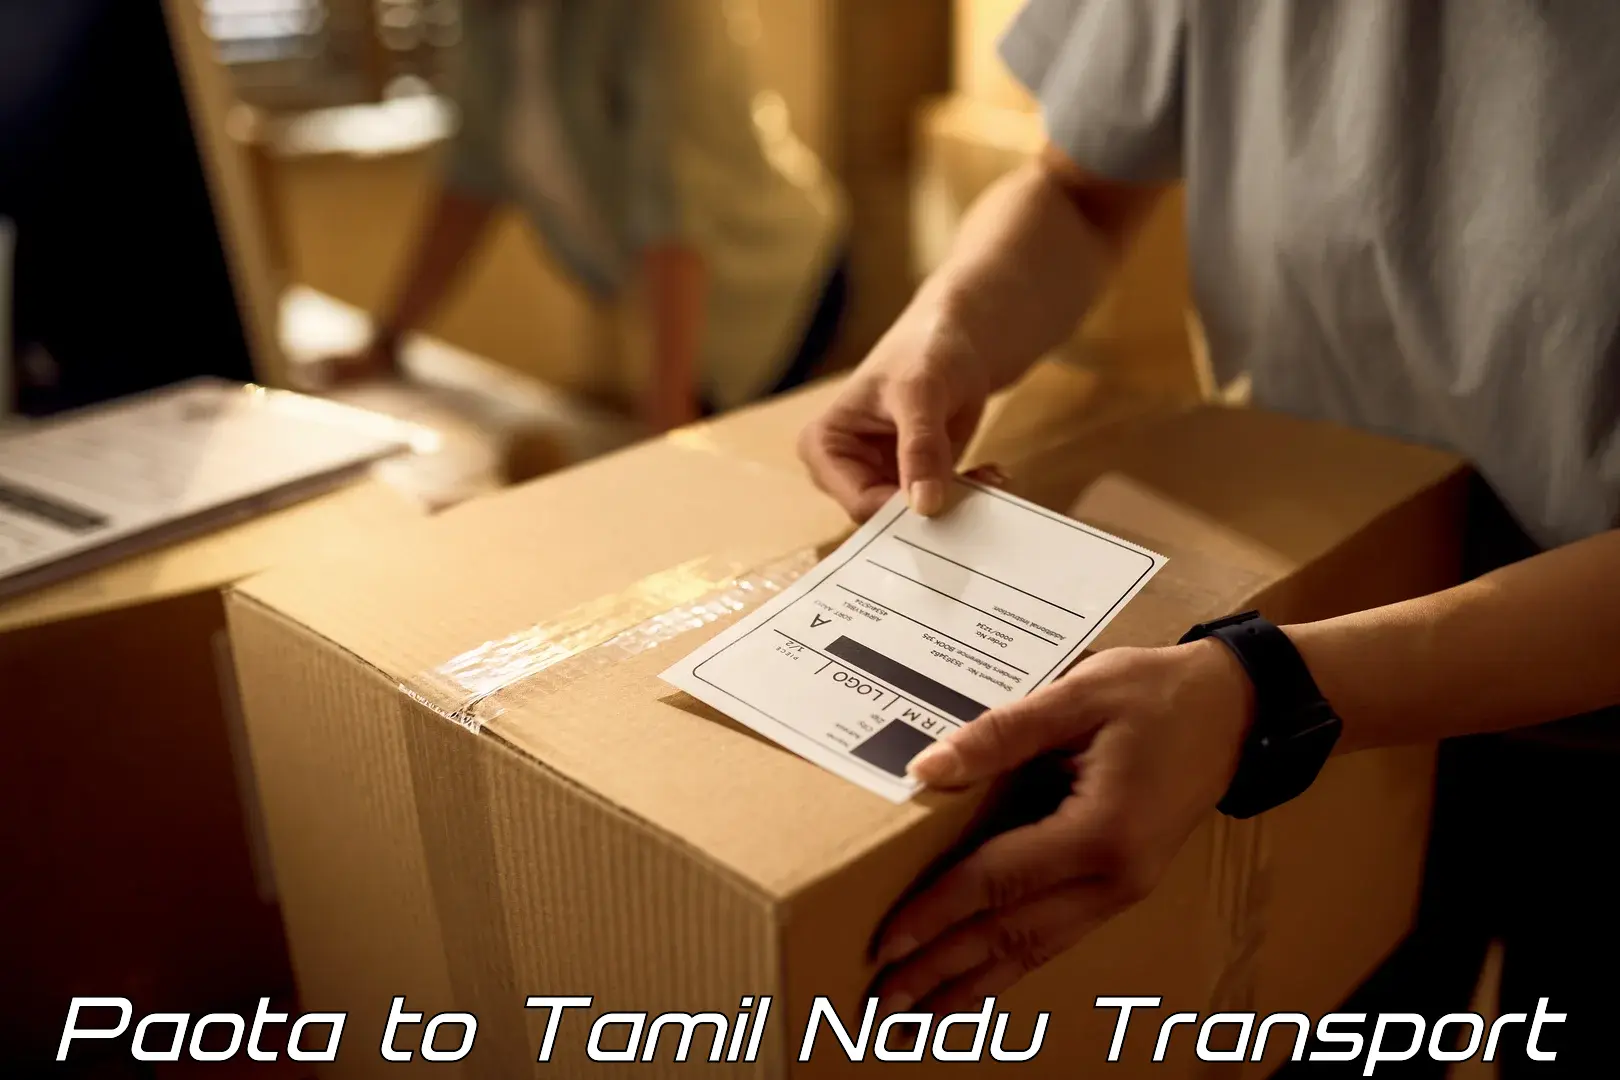 Goods delivery service Paota to Virudhunagar